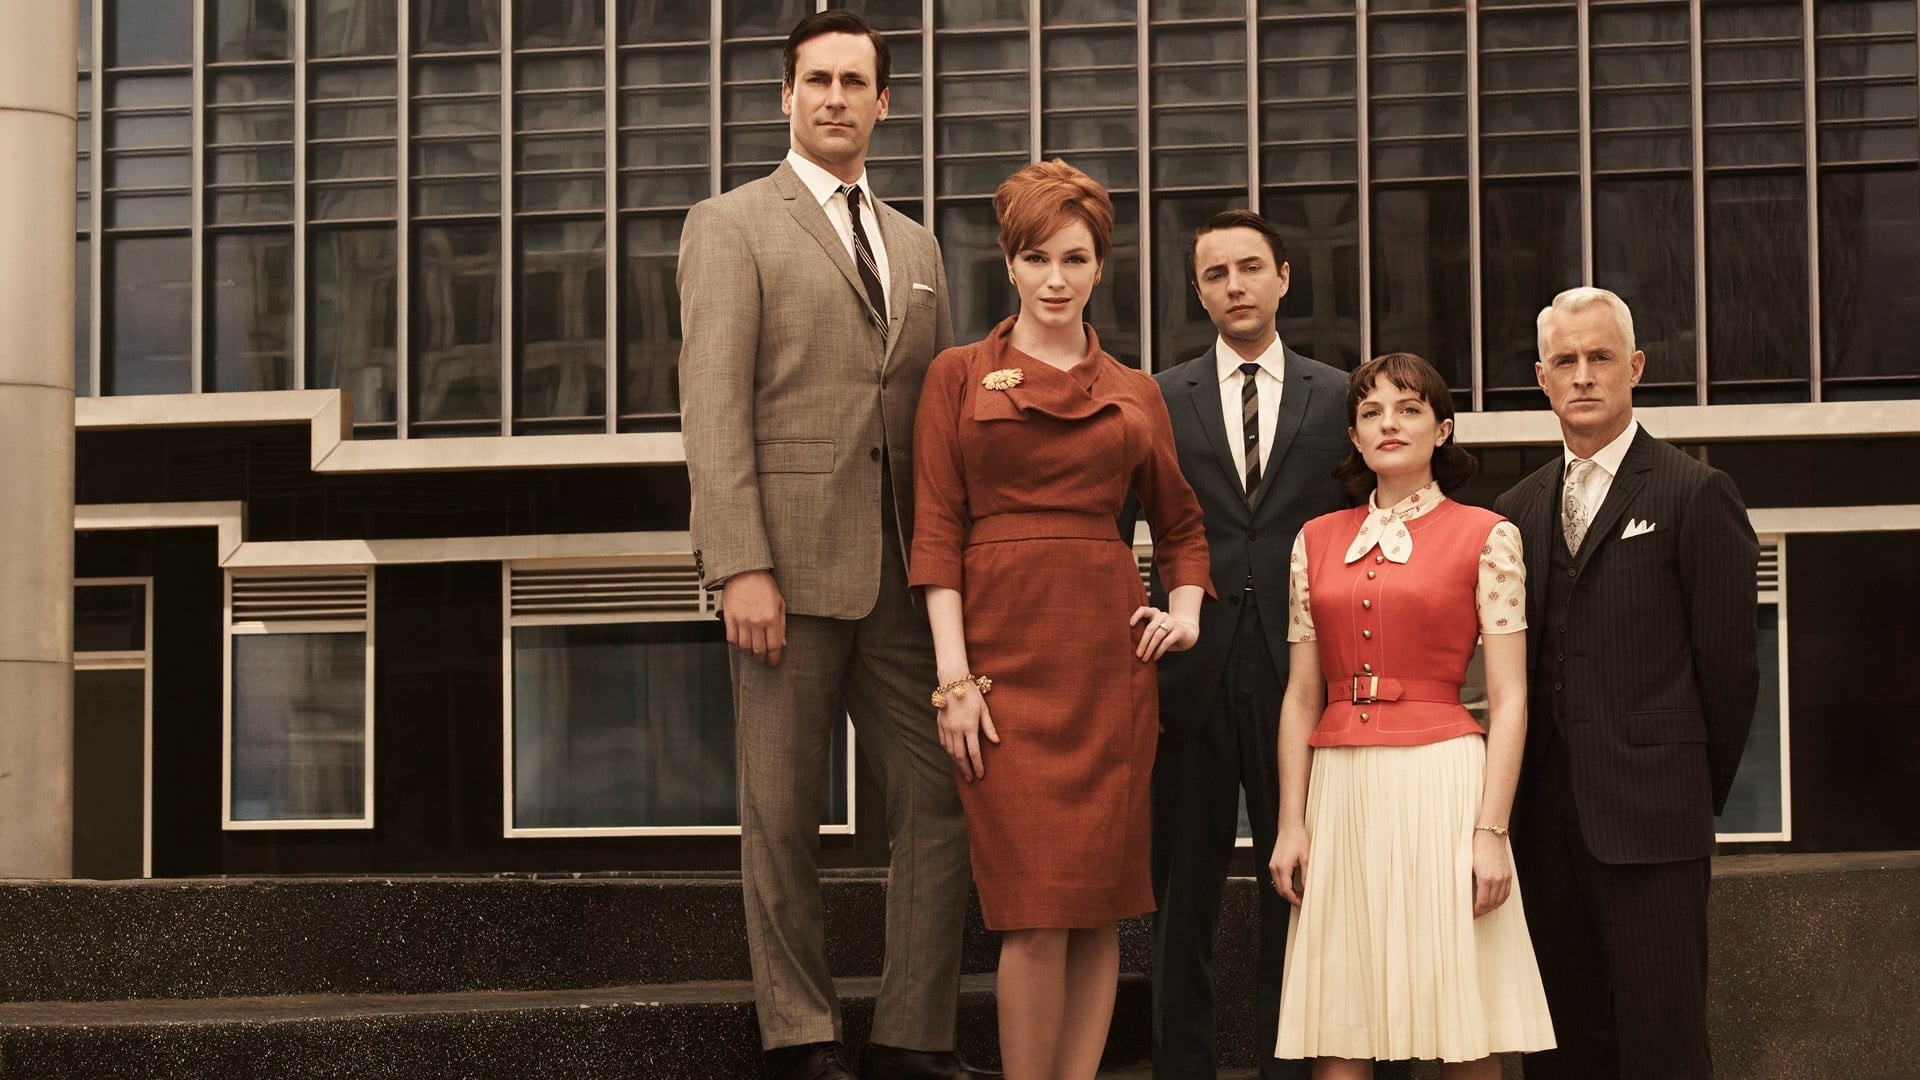 Mad Men (TV Series): The greatest television series of all time and a part of the early 21st century Golden Age of Television. 1920x1080 Full HD Background.